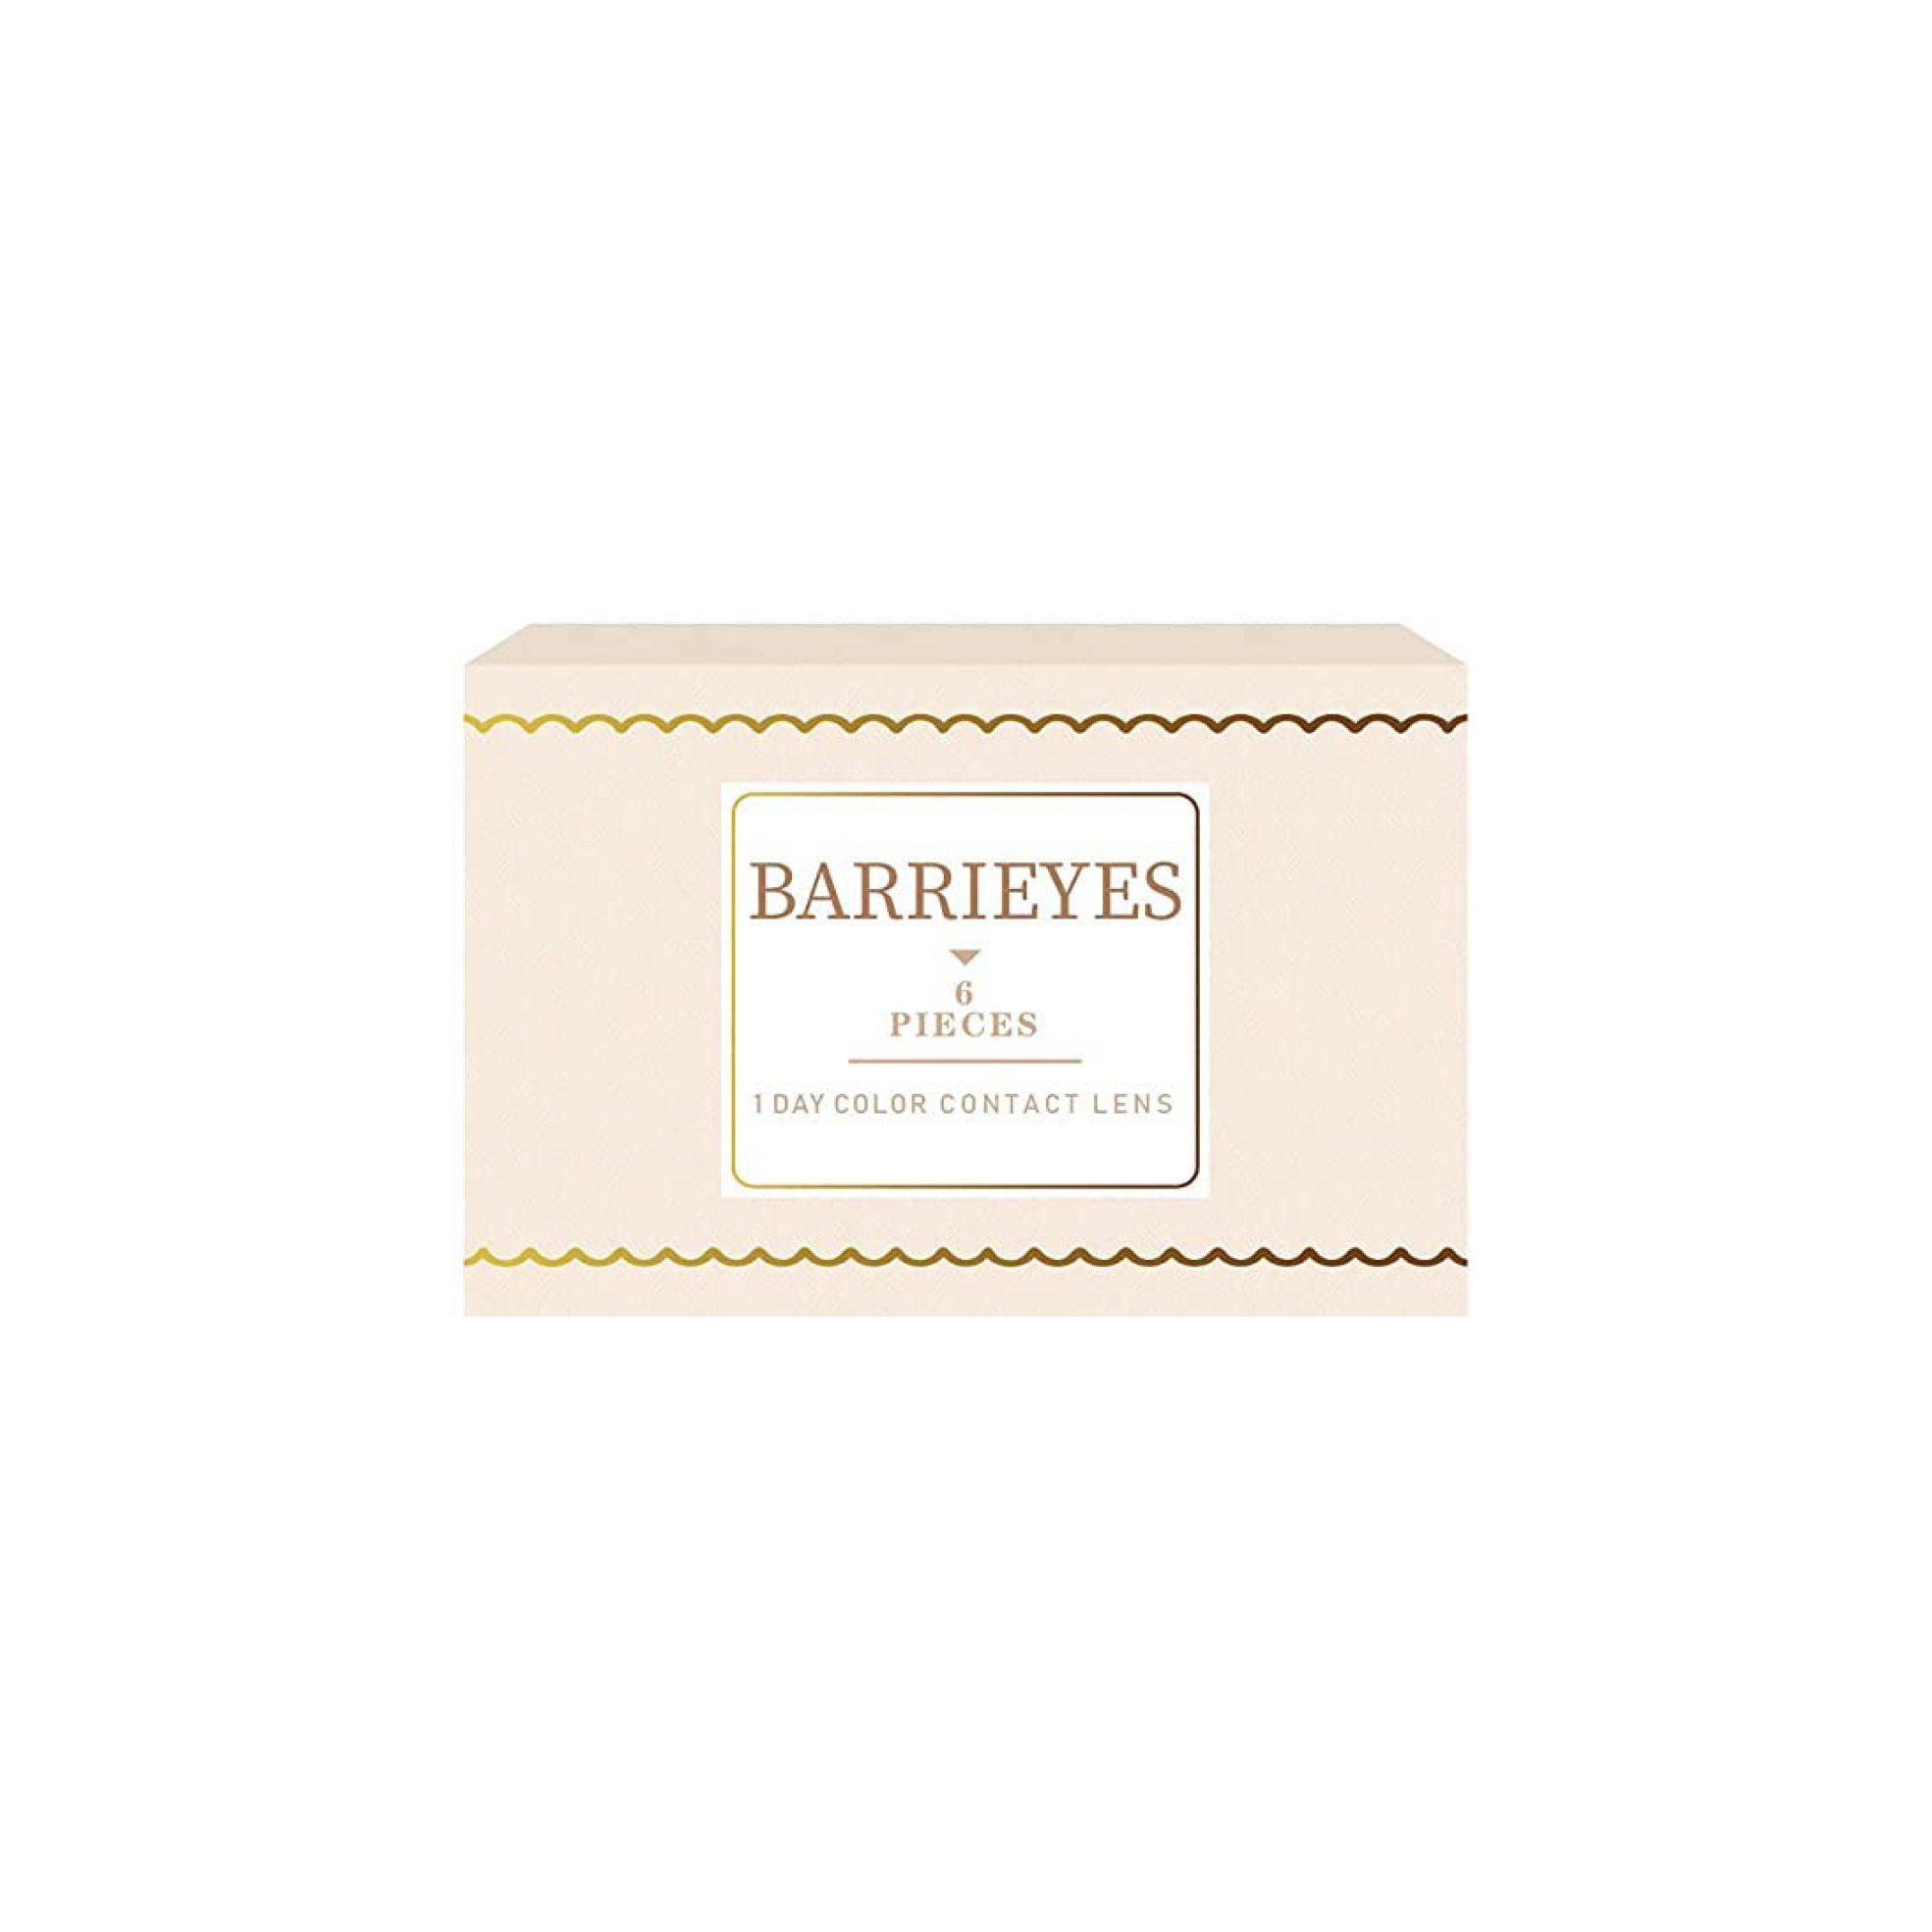 Barrieyes 1-Day color contact lens #Summer brown日抛美瞳夏褐棕｜6 Pcs